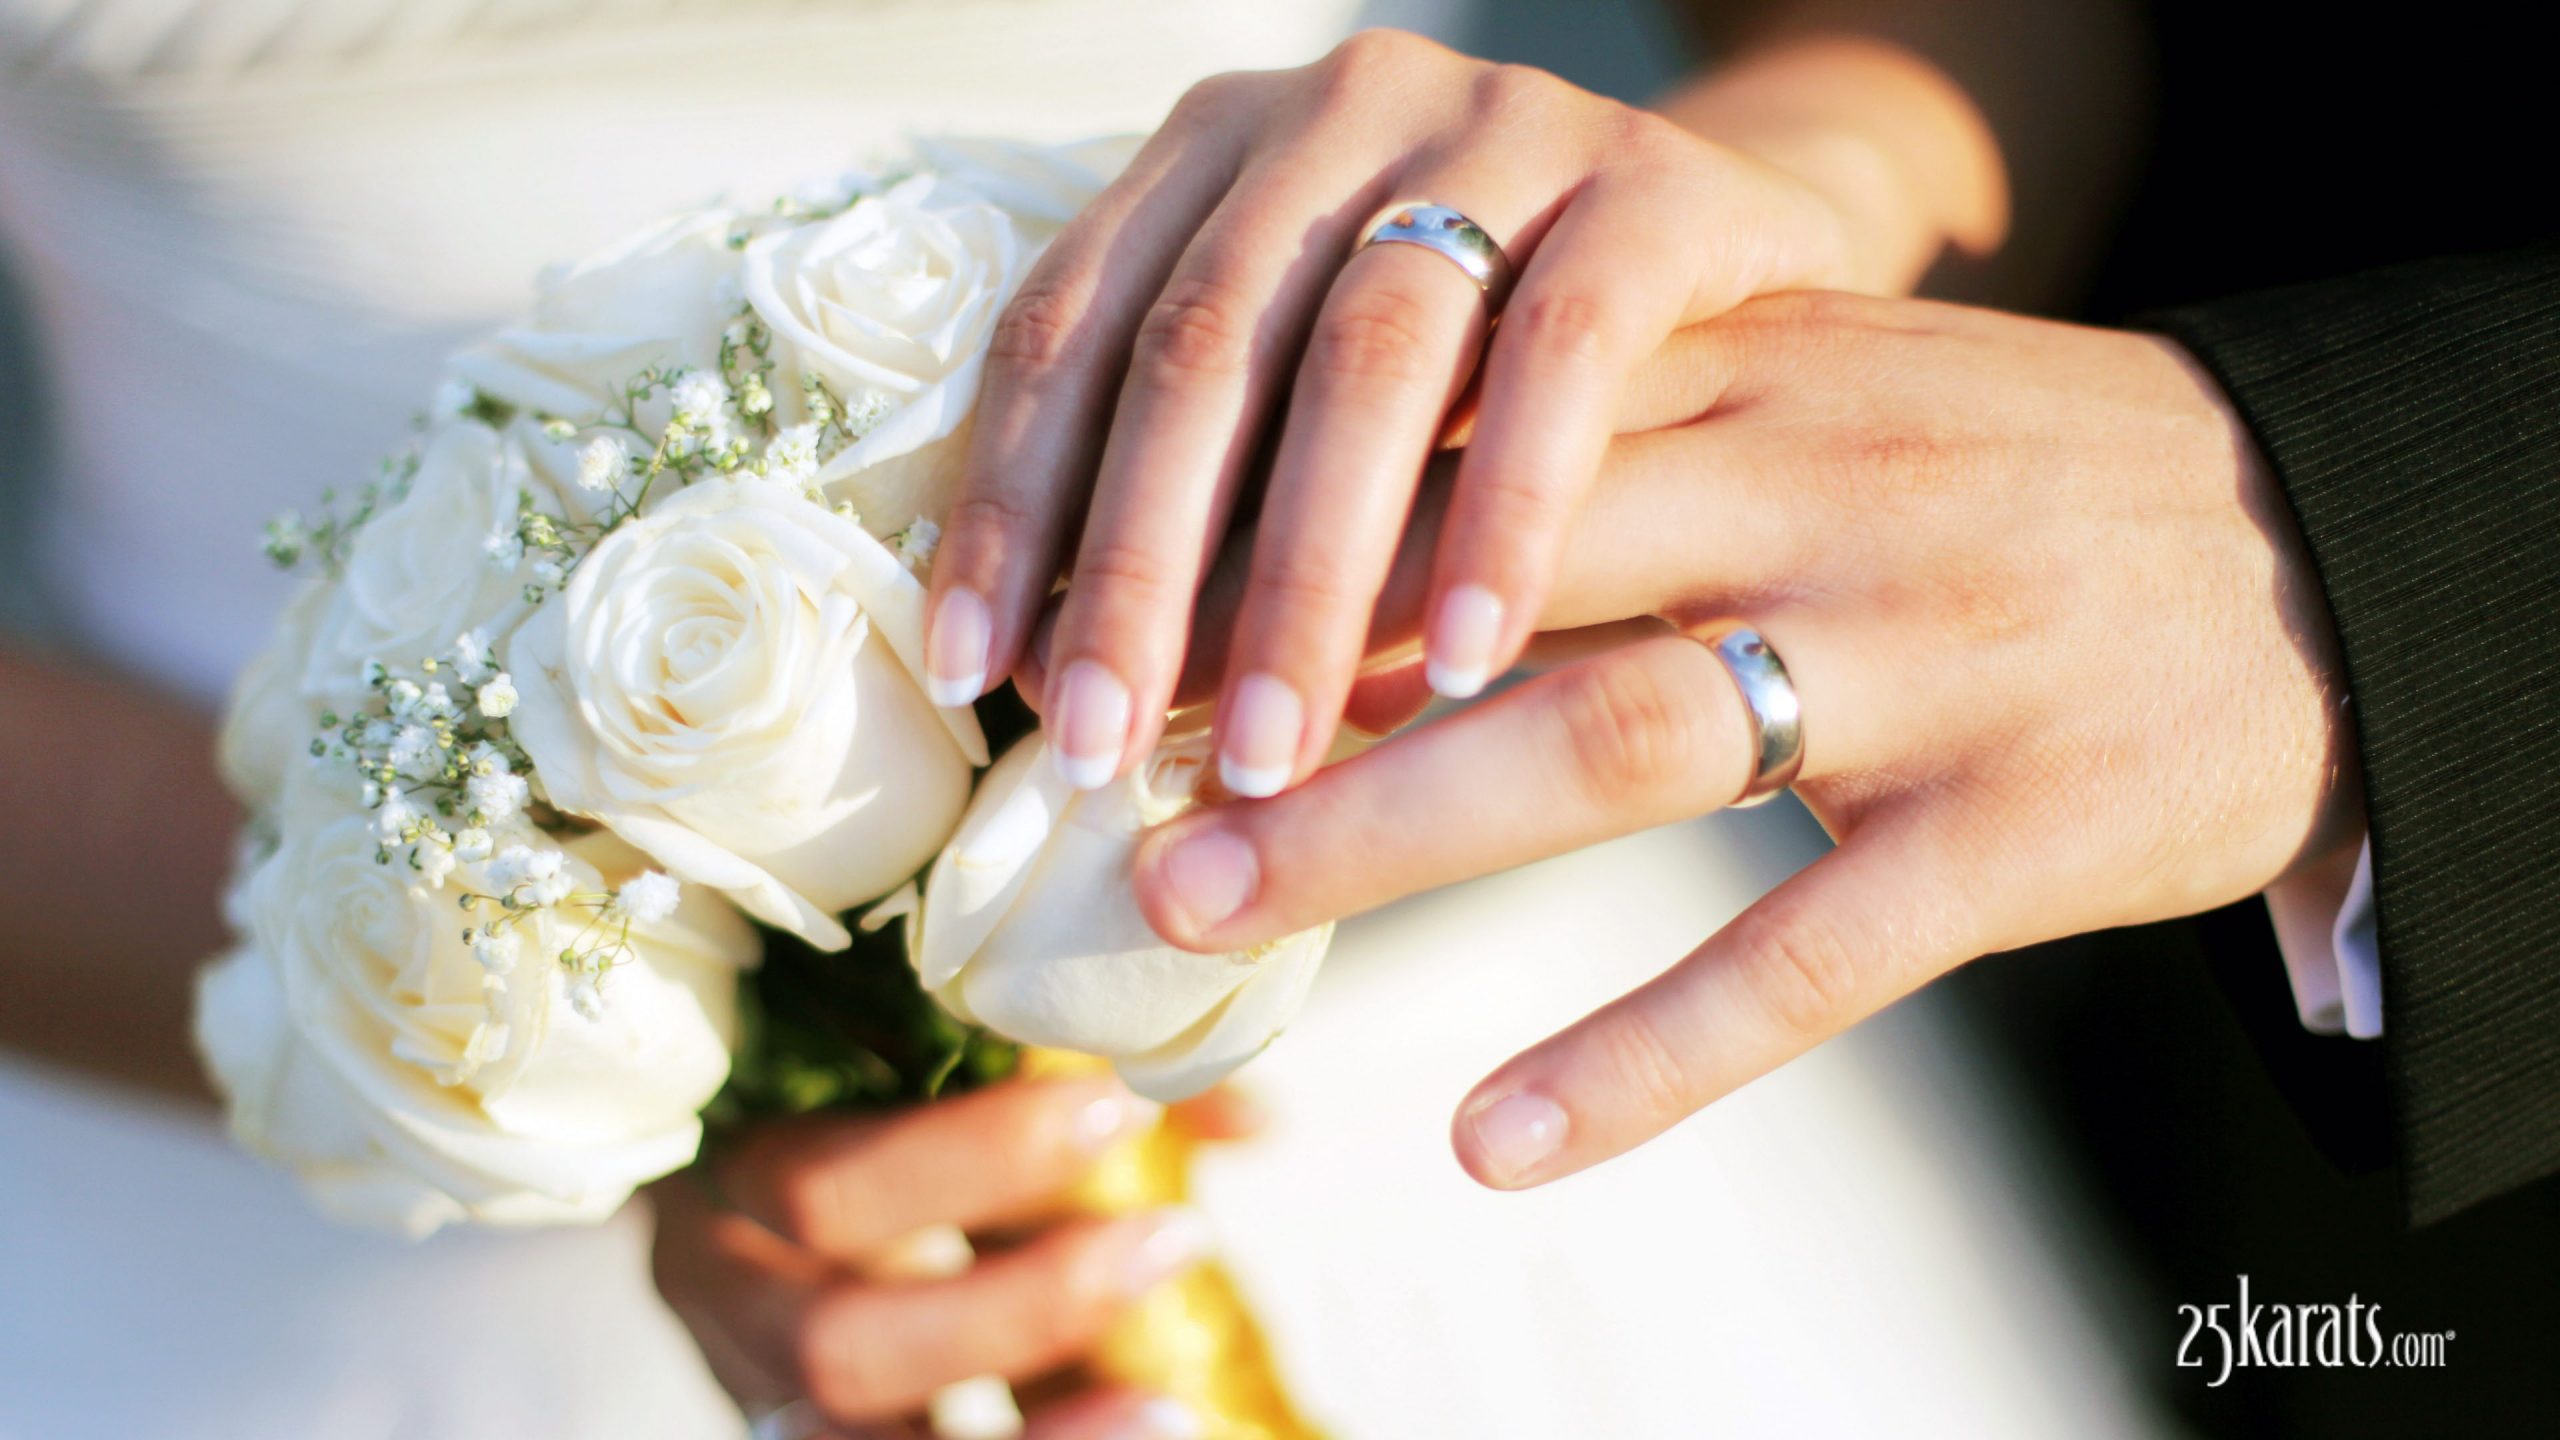 Which Countries Wear Wedding Ring On Their Right Hand?